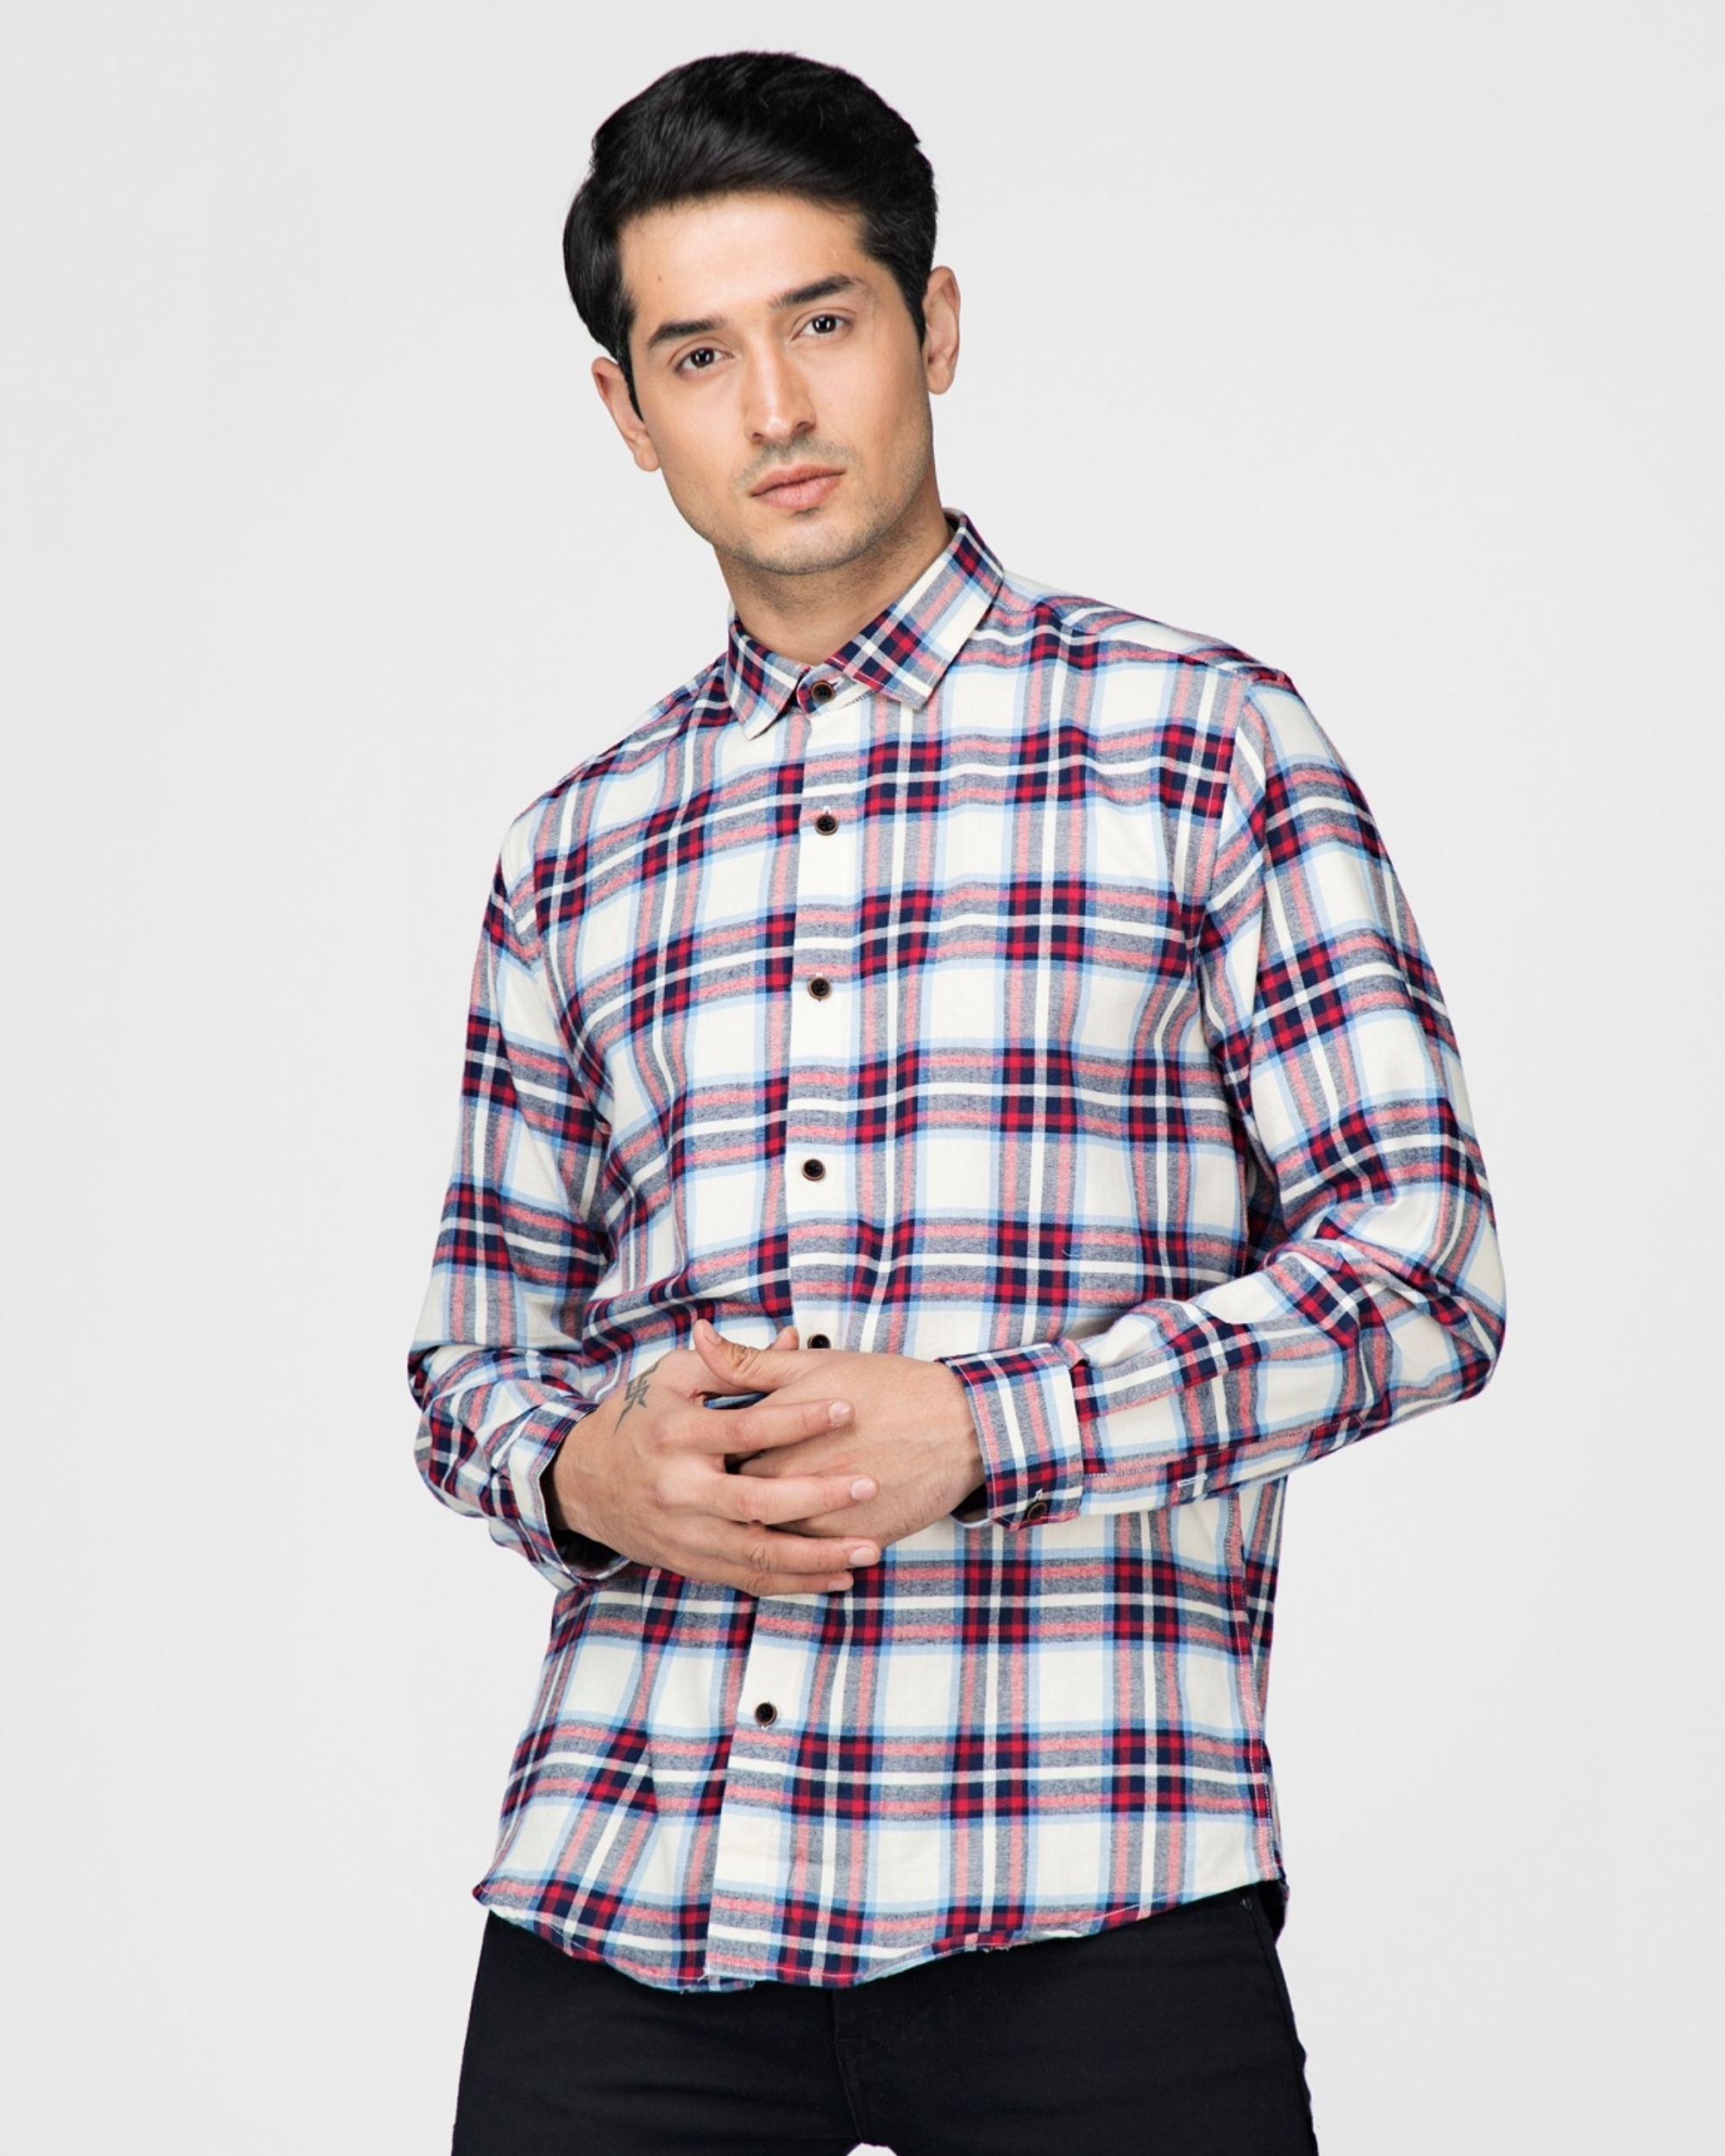 Red and white plaid shirt by Green Hill | The Secret Label